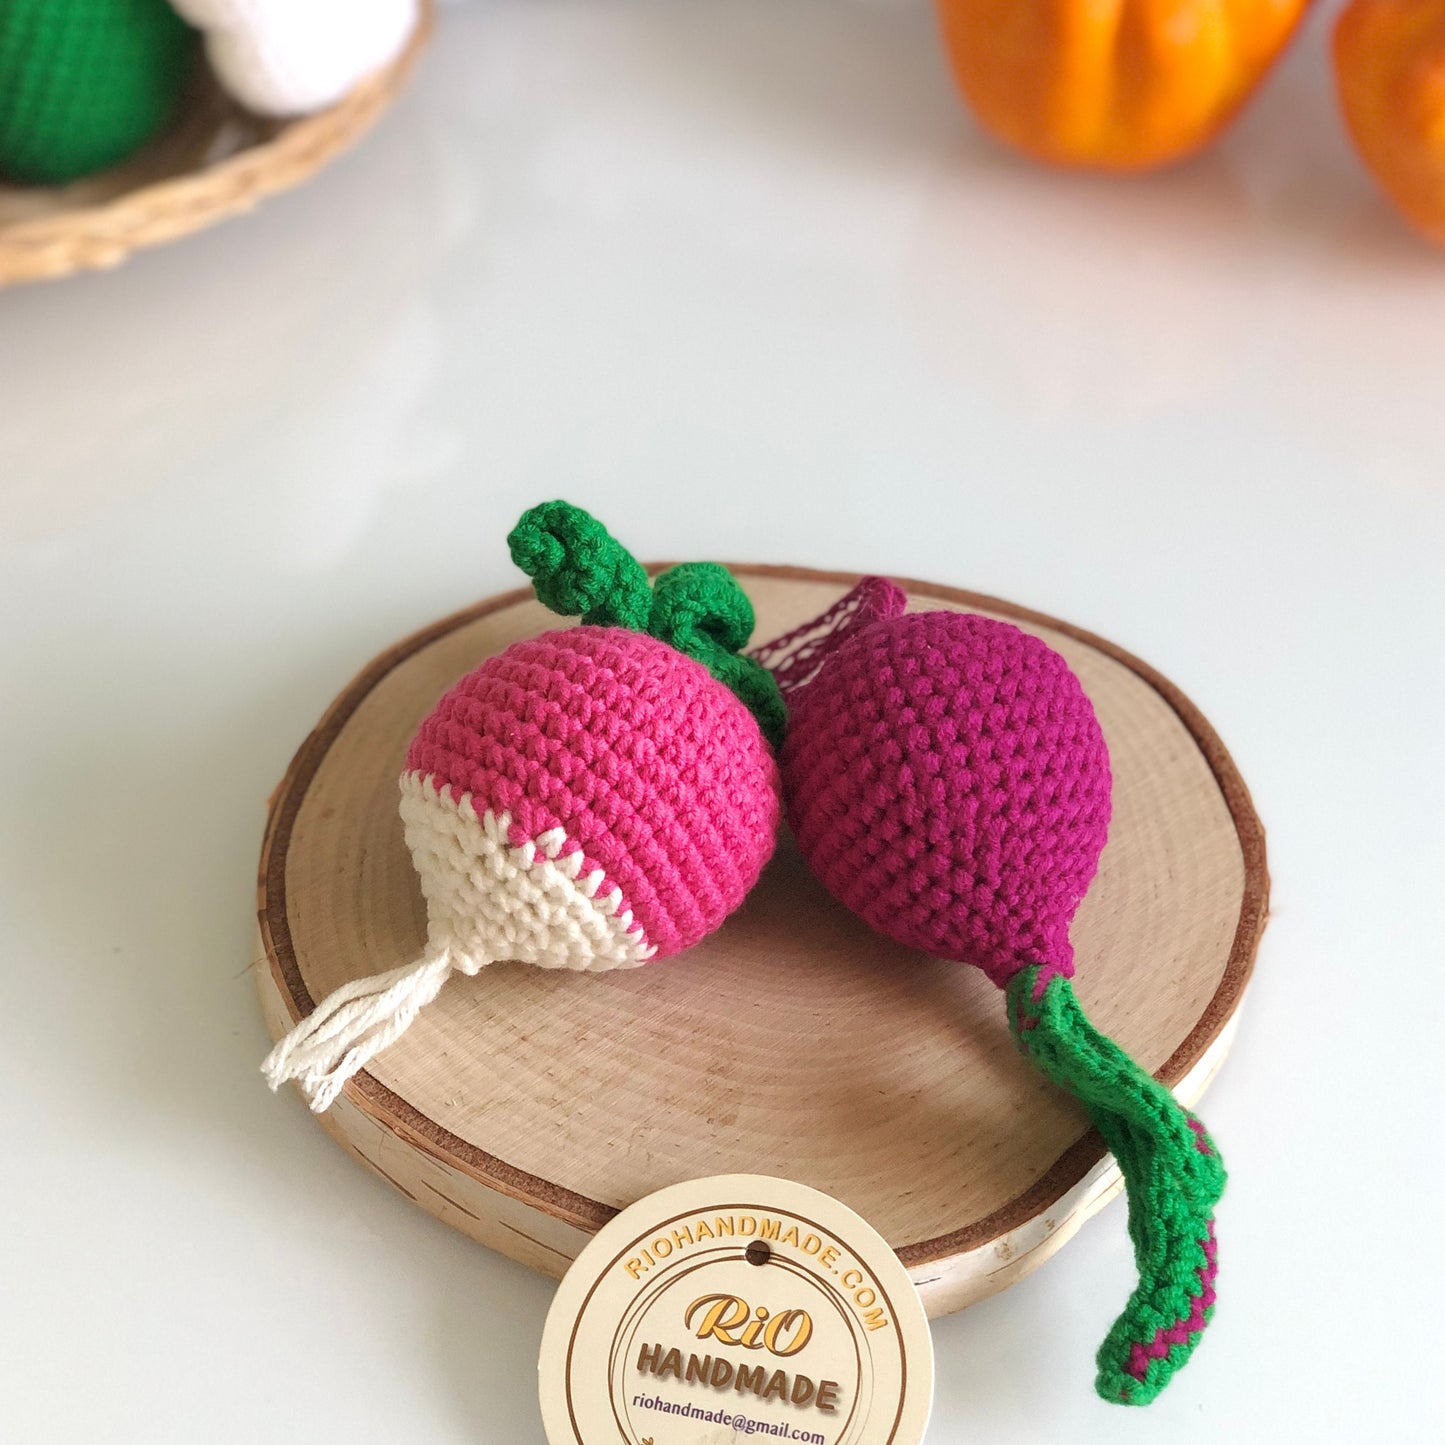 Crochet play vegetables and fruit set